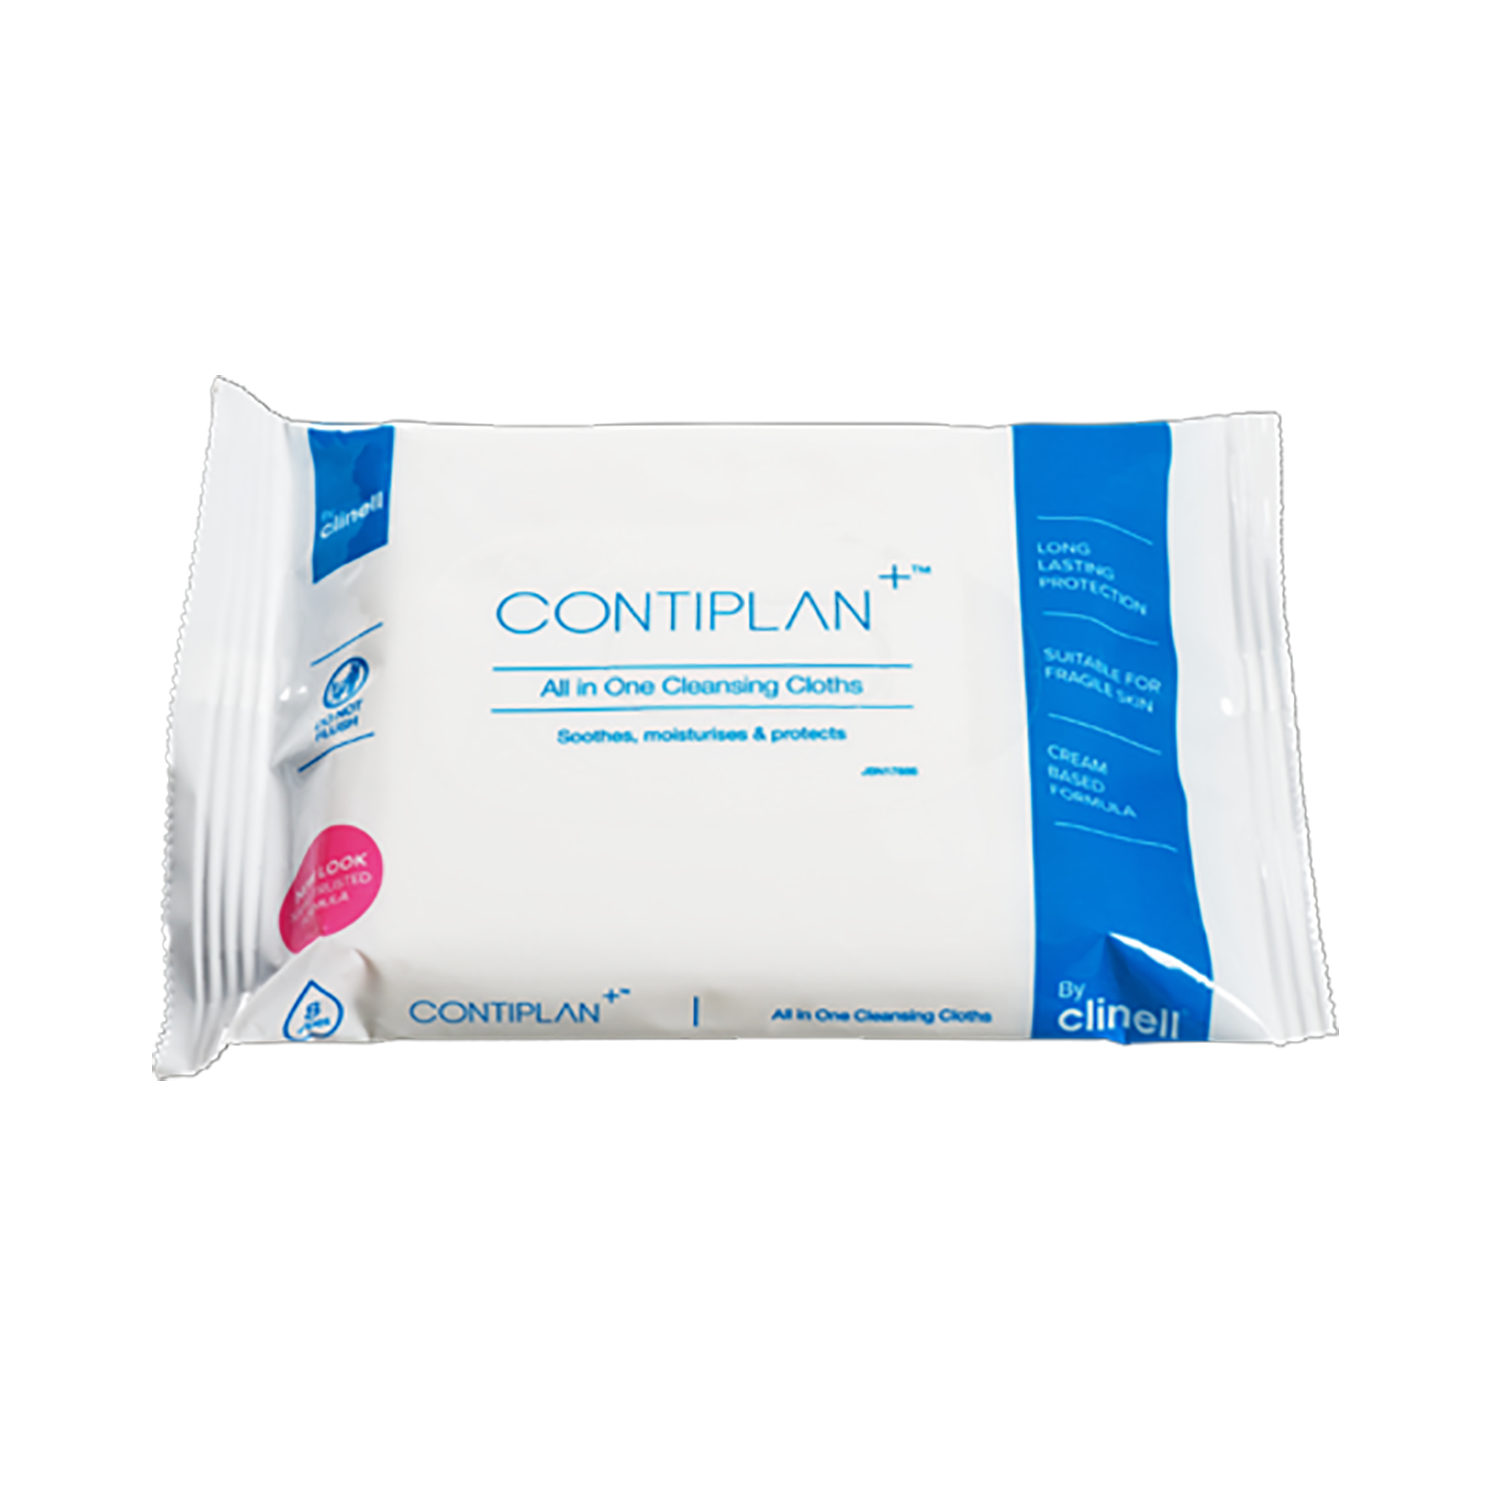 Clinell Contiplan+ All-in-One Cleansing Cloths | Pack of 8